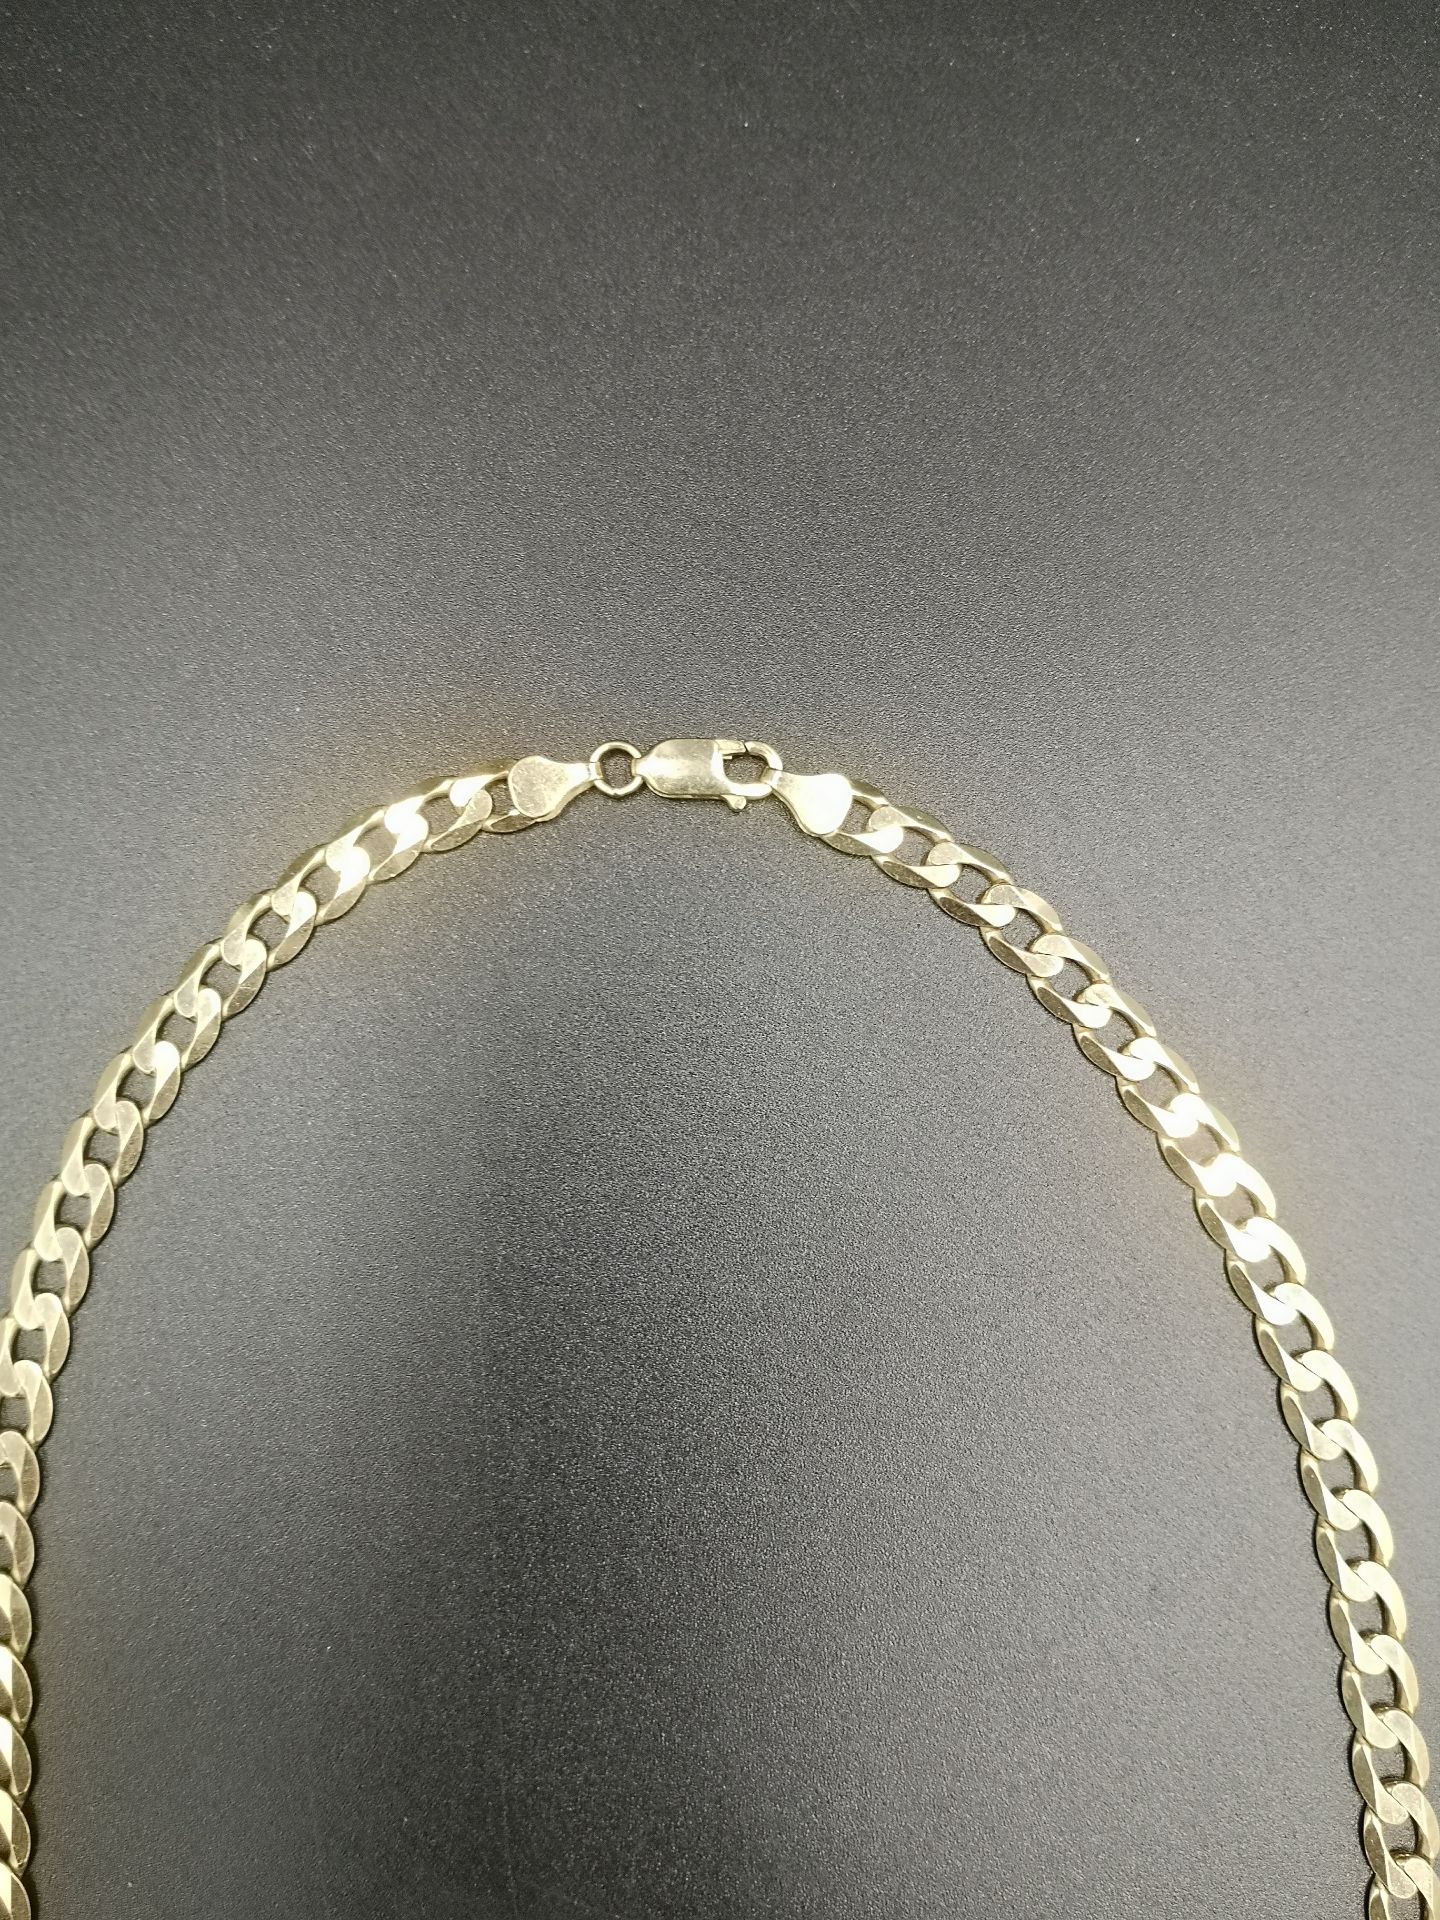 9ct gold curb link chain - Image 2 of 7